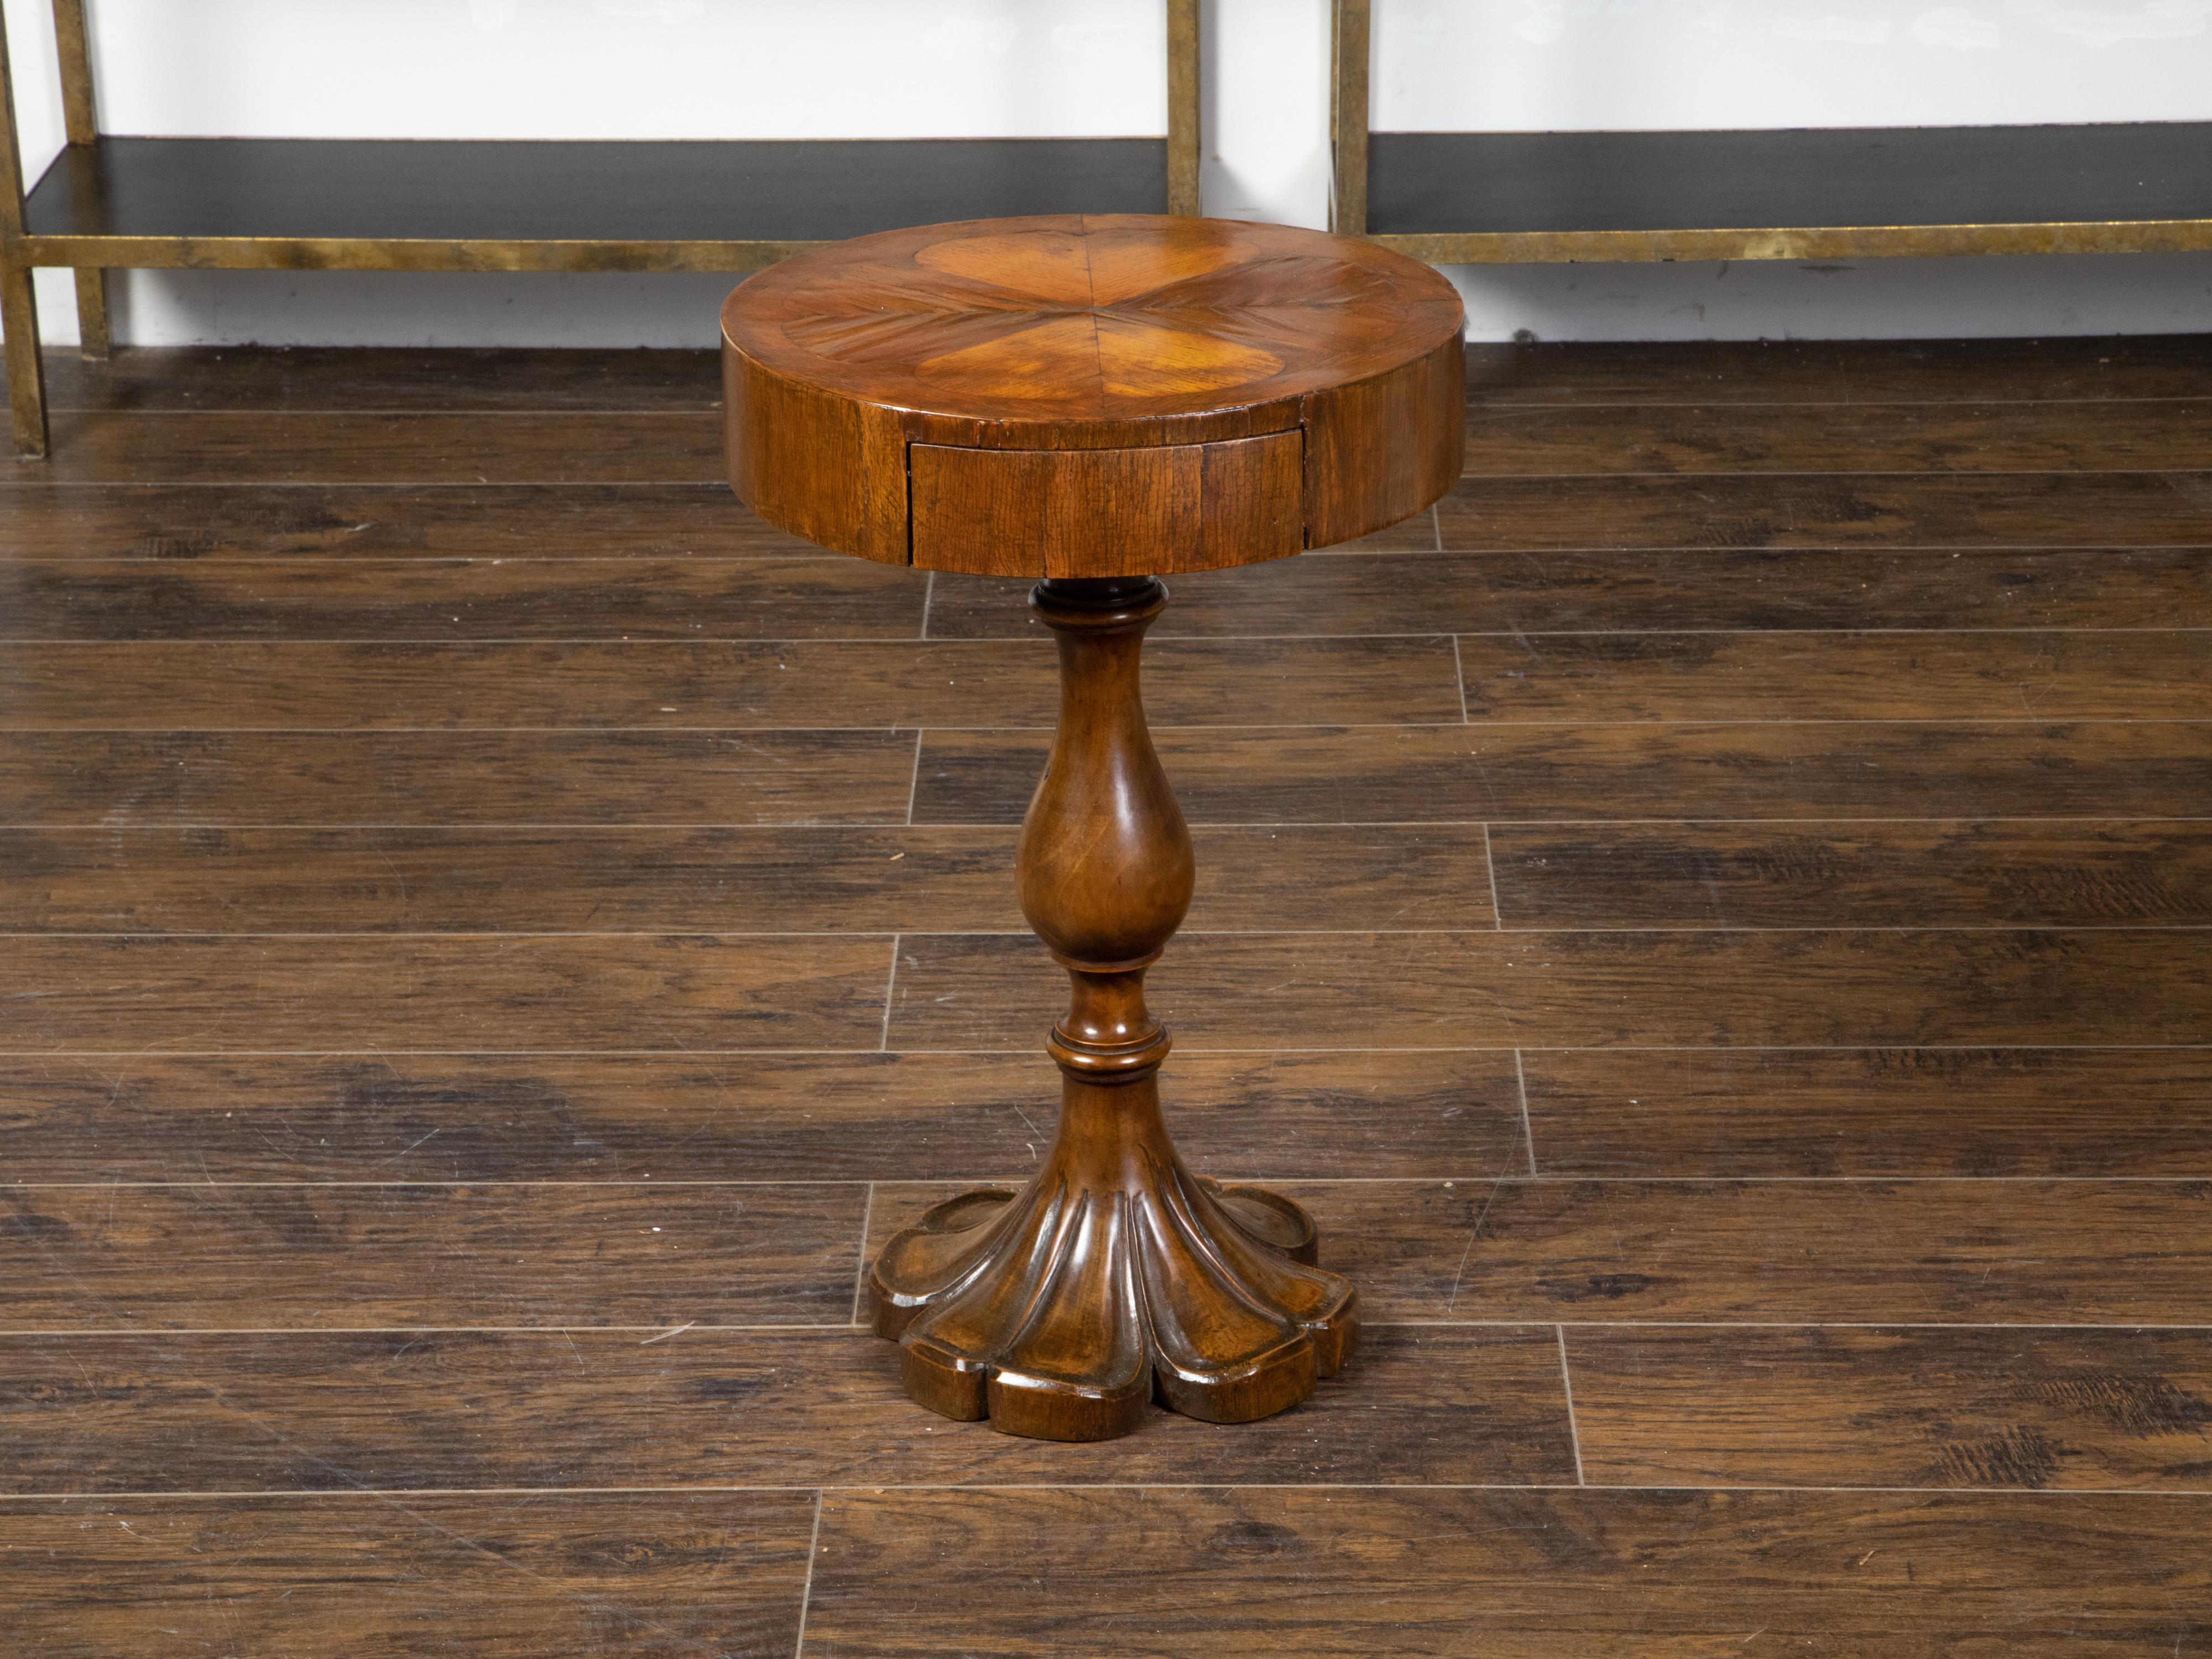 An Italian small walnut pedestal side table from the 19th century, with heart-shaped inlay and flaring base. Created in Italy during the 19th century, this pedestal table features a circular top adorned with heart-shaped inlay alternating dark and